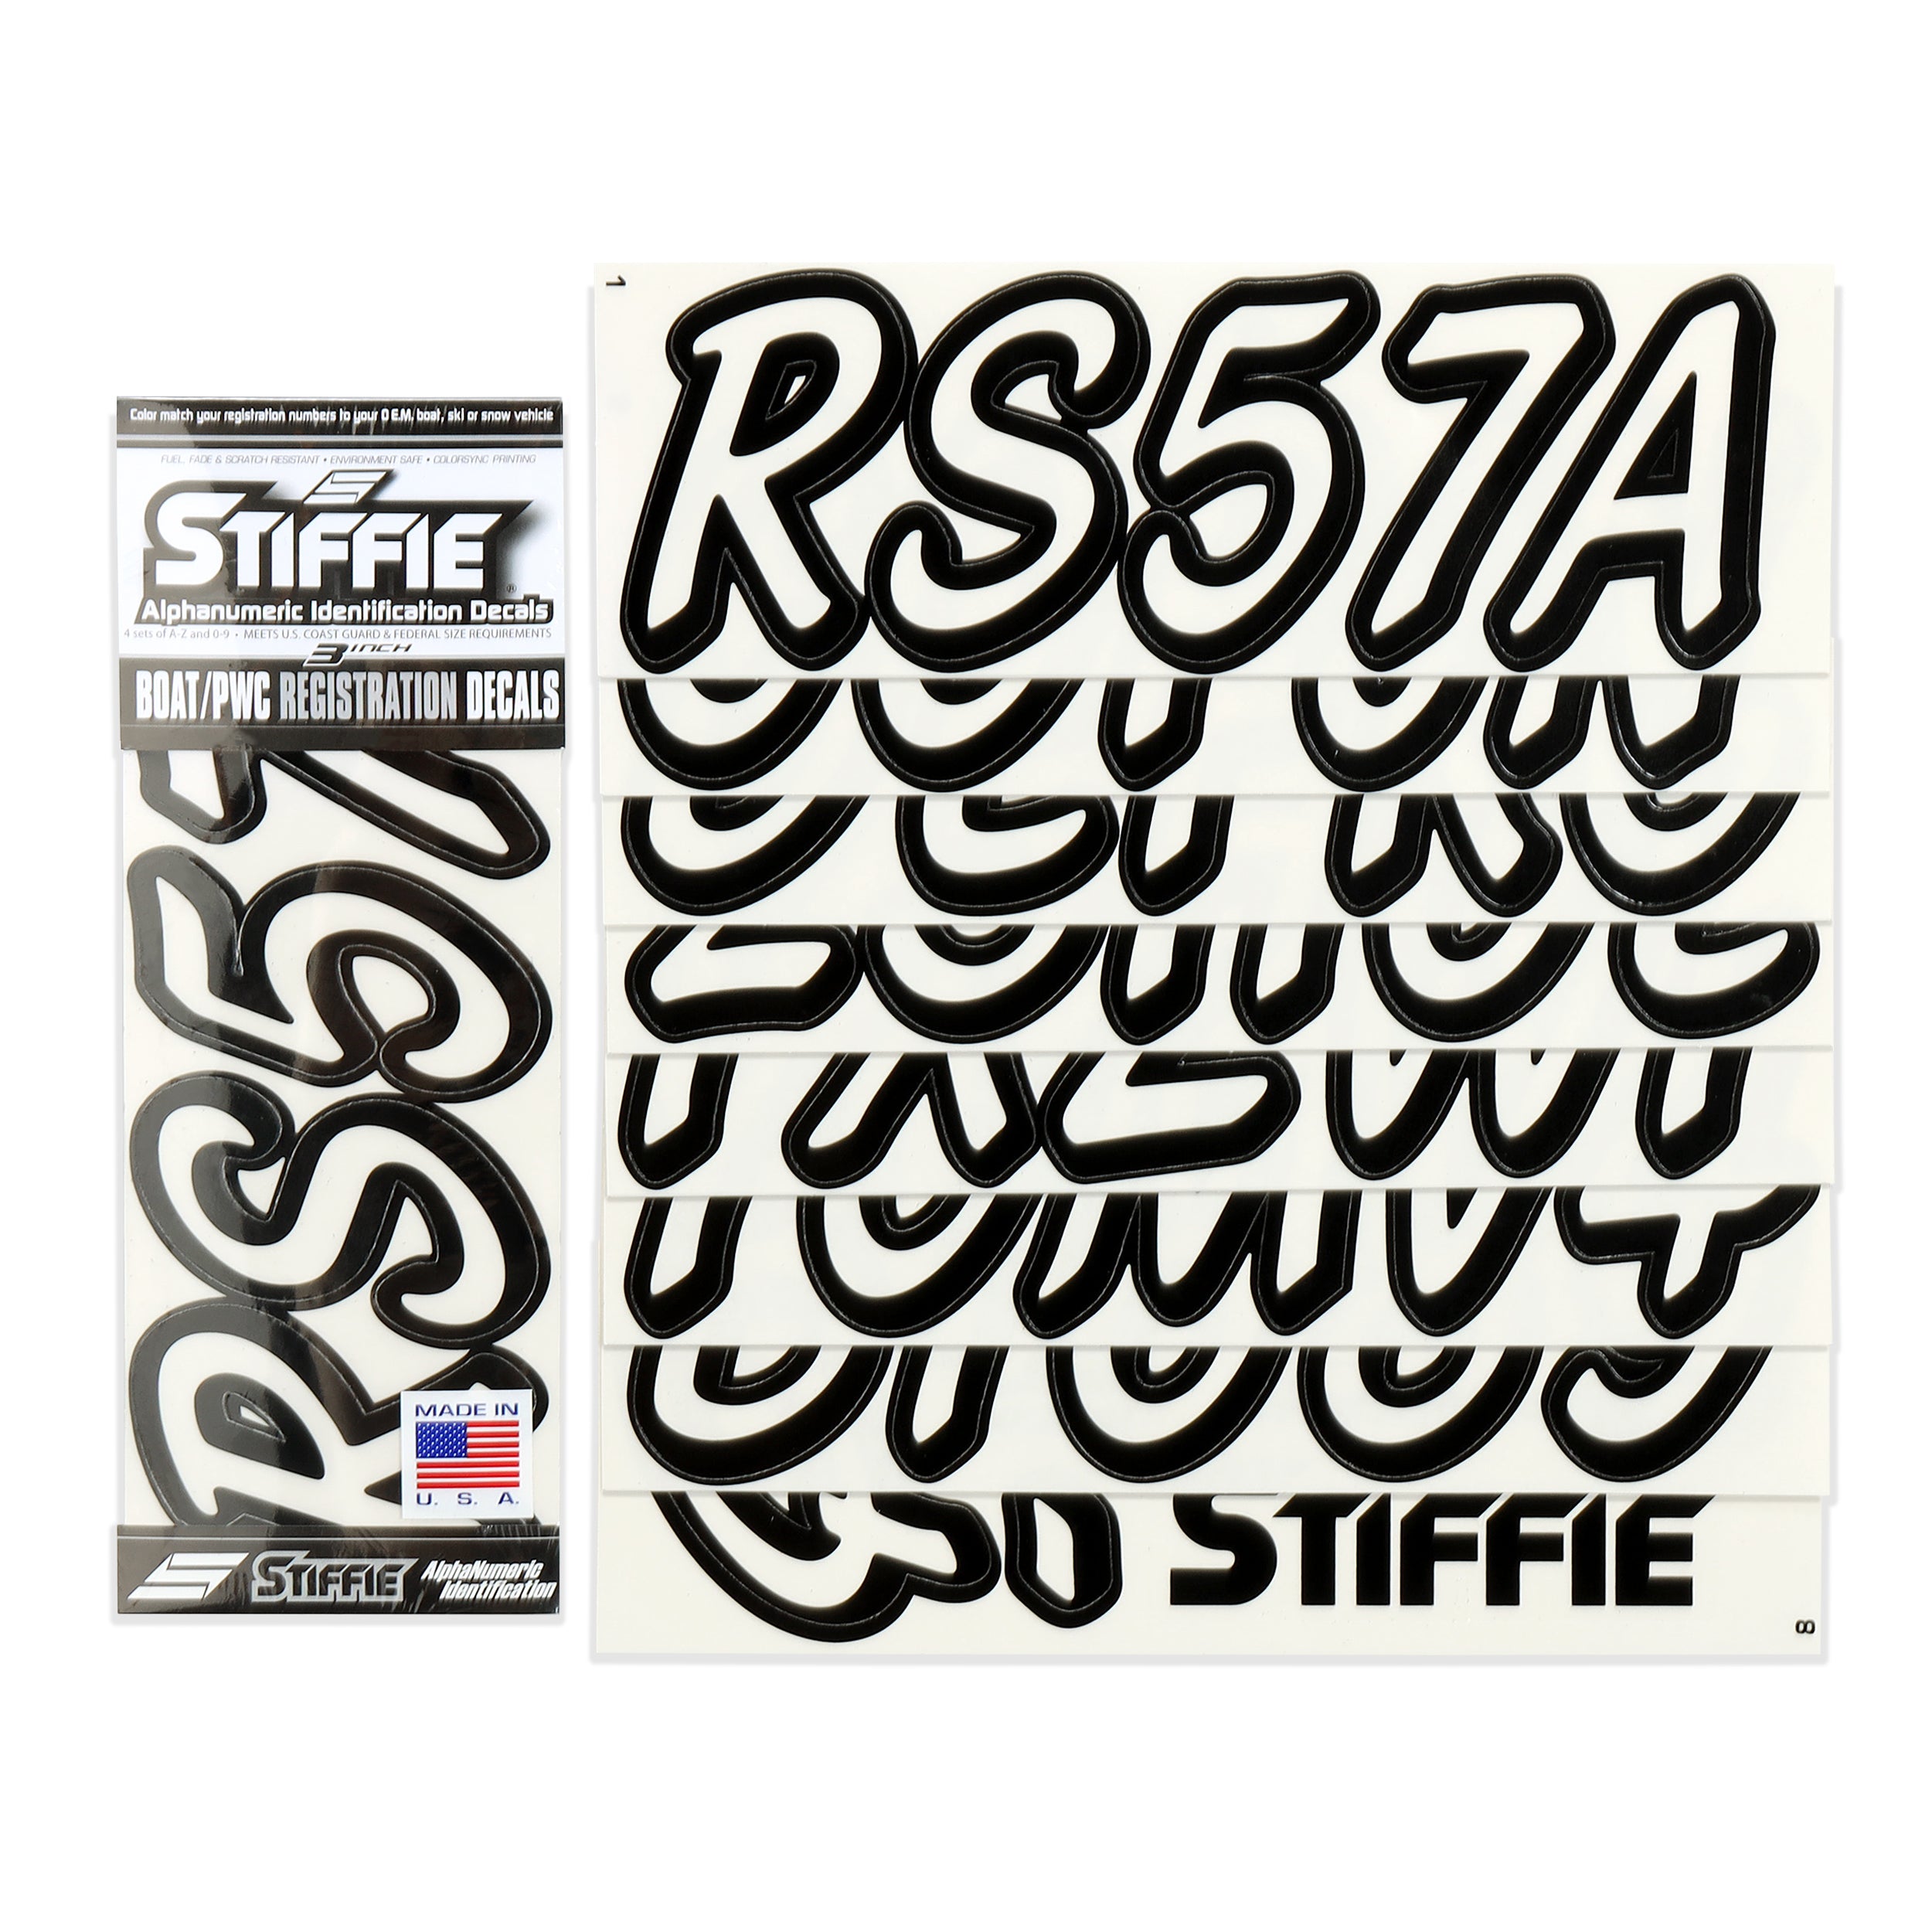 STIFFIE Whipline Solid Transparent/Black 3" Alpha-Numeric Registration Identification Numbers Stickers Decals for Boats & Personal Watercraft